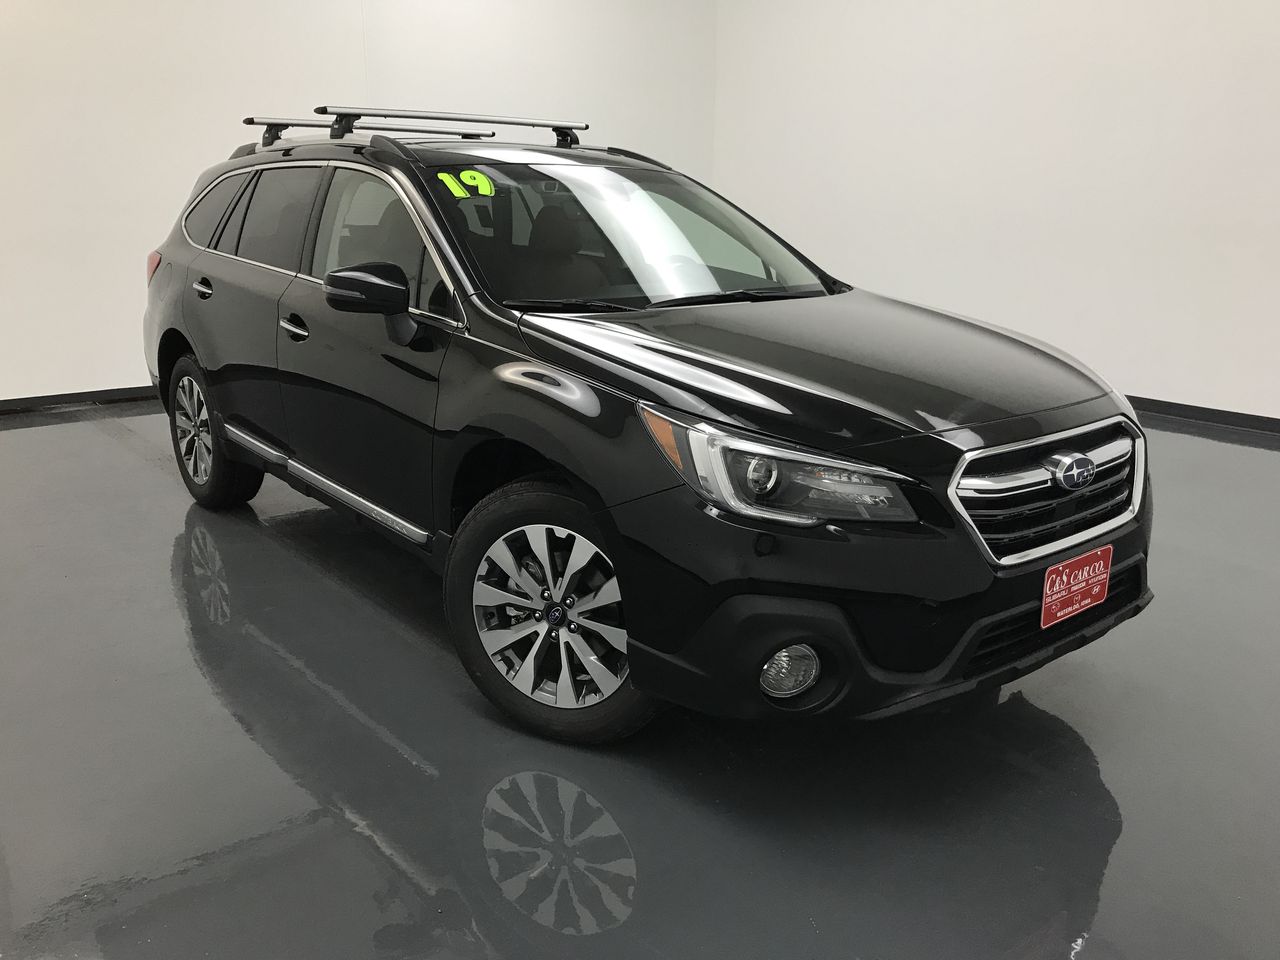 2019 Subaru Outback Roof Rack Weight Limit - Greatest Subaru 2019 Subaru Crosstrek Roof Rack Weight Limit